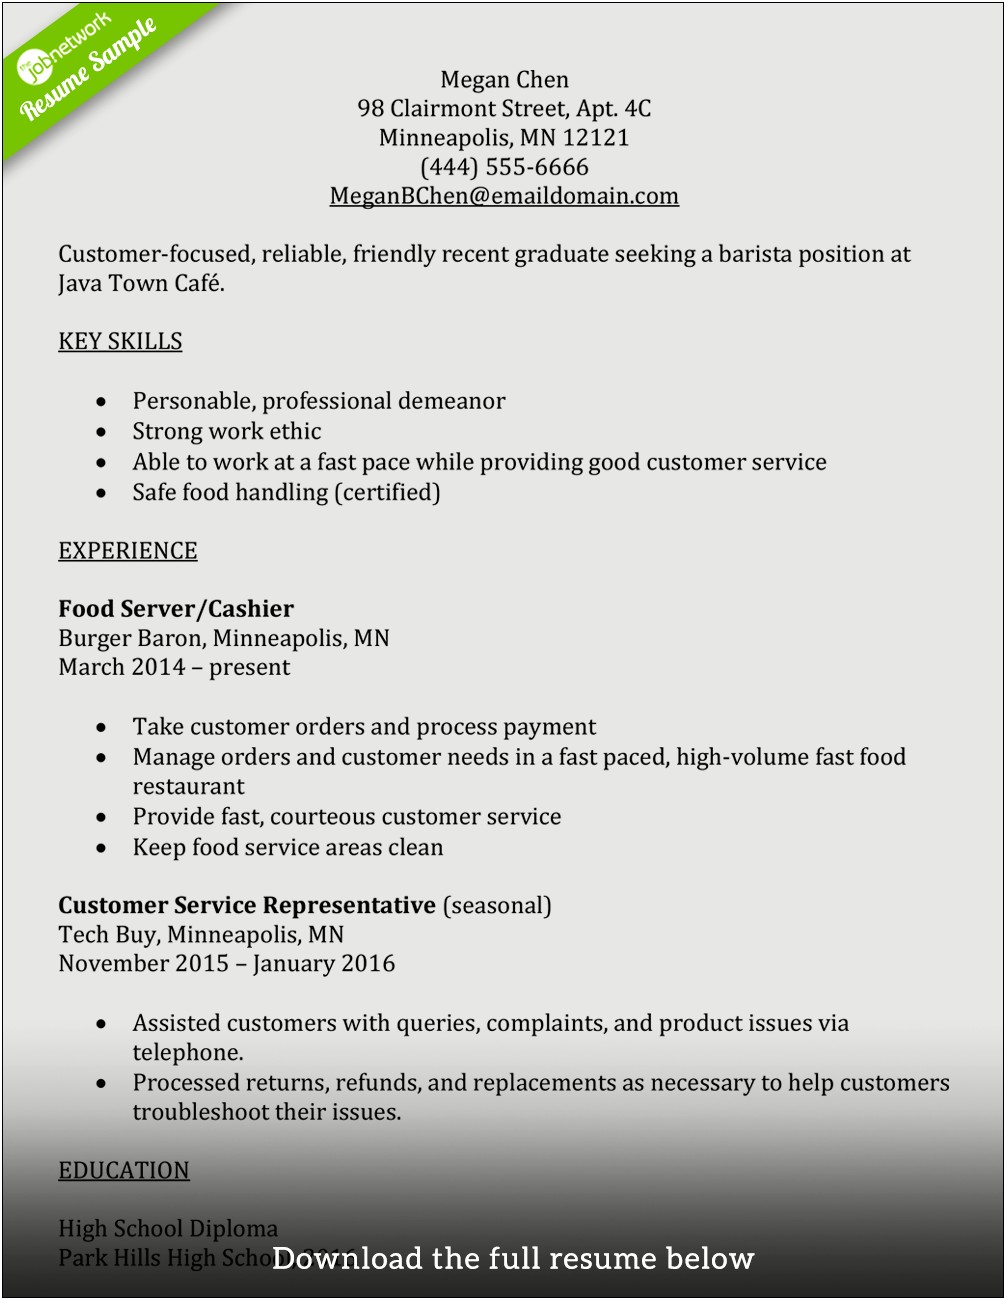 Example Resume Of A Cafe Team Member